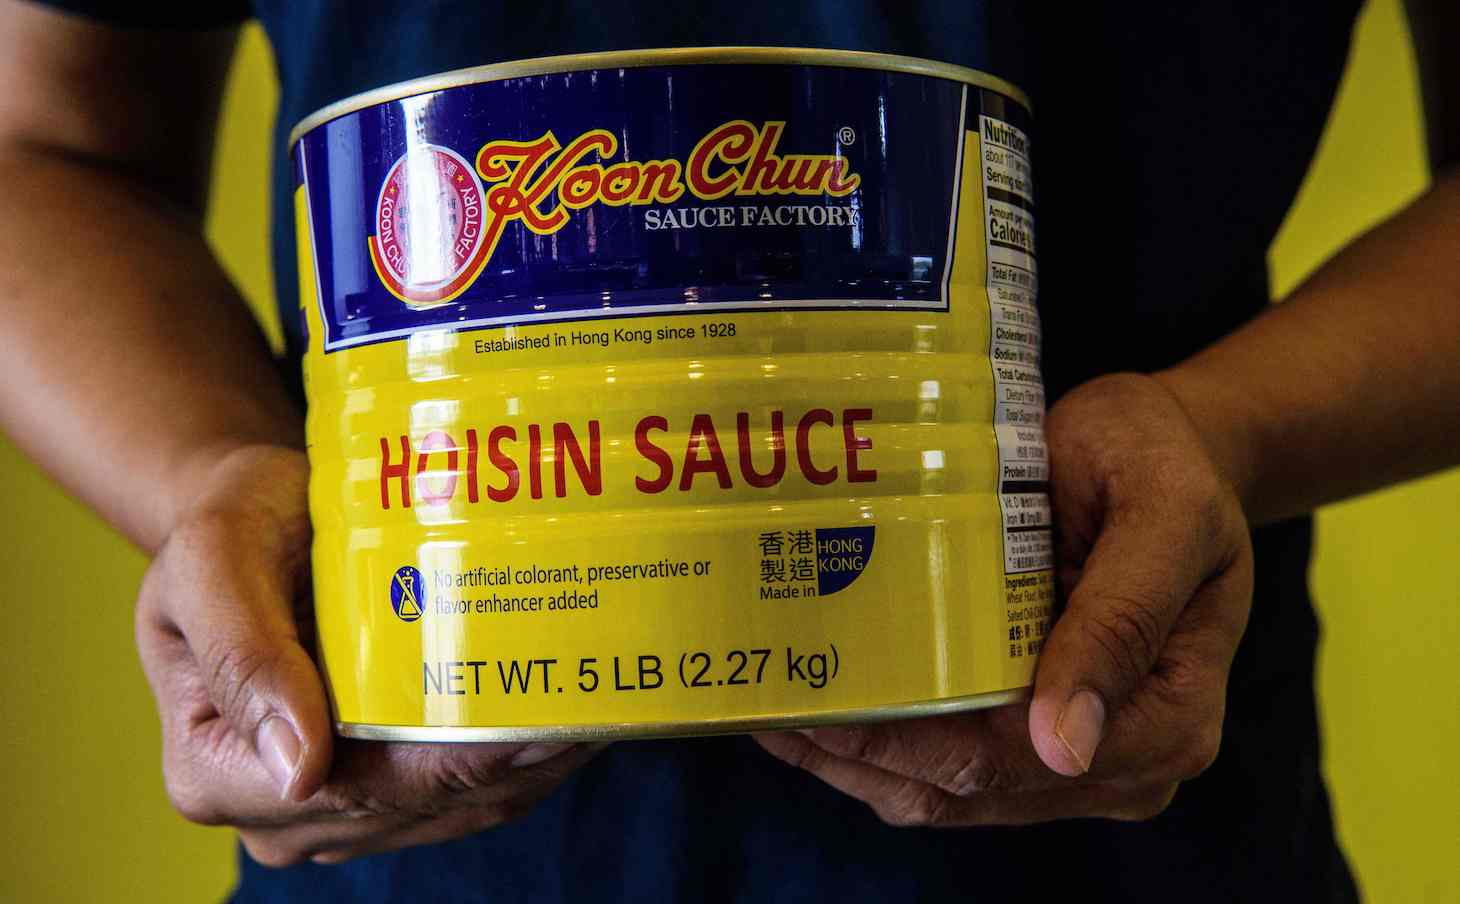 In this picture taken on August 27, 2020, Daniel Chan poses with a tin of Hoisin sauce with labling that reads ÒMade in Hong KongÓ made at the Koon Chun Sauce Factory, founded by his great-grandfather n 1928, in Hong Kong, which produces soy, hoisin and oyster sauces found in Chinese restaurants and kitchens around the world. - At the Koon Chun Sauce Factory workers are scrambling to cover hundreds of thousands of bottles with new "Made in China" labels as the popular Hong Kong brand falls victim to spiralling diplomatic tensions. (Photo by Anthony WALLACE / AFP) / TO GO WITH: HongKong-China-US-politics-economy, FOCUS by Su Xinqi (Photo by ANTHONY WALLACE/AFP via Getty Images)